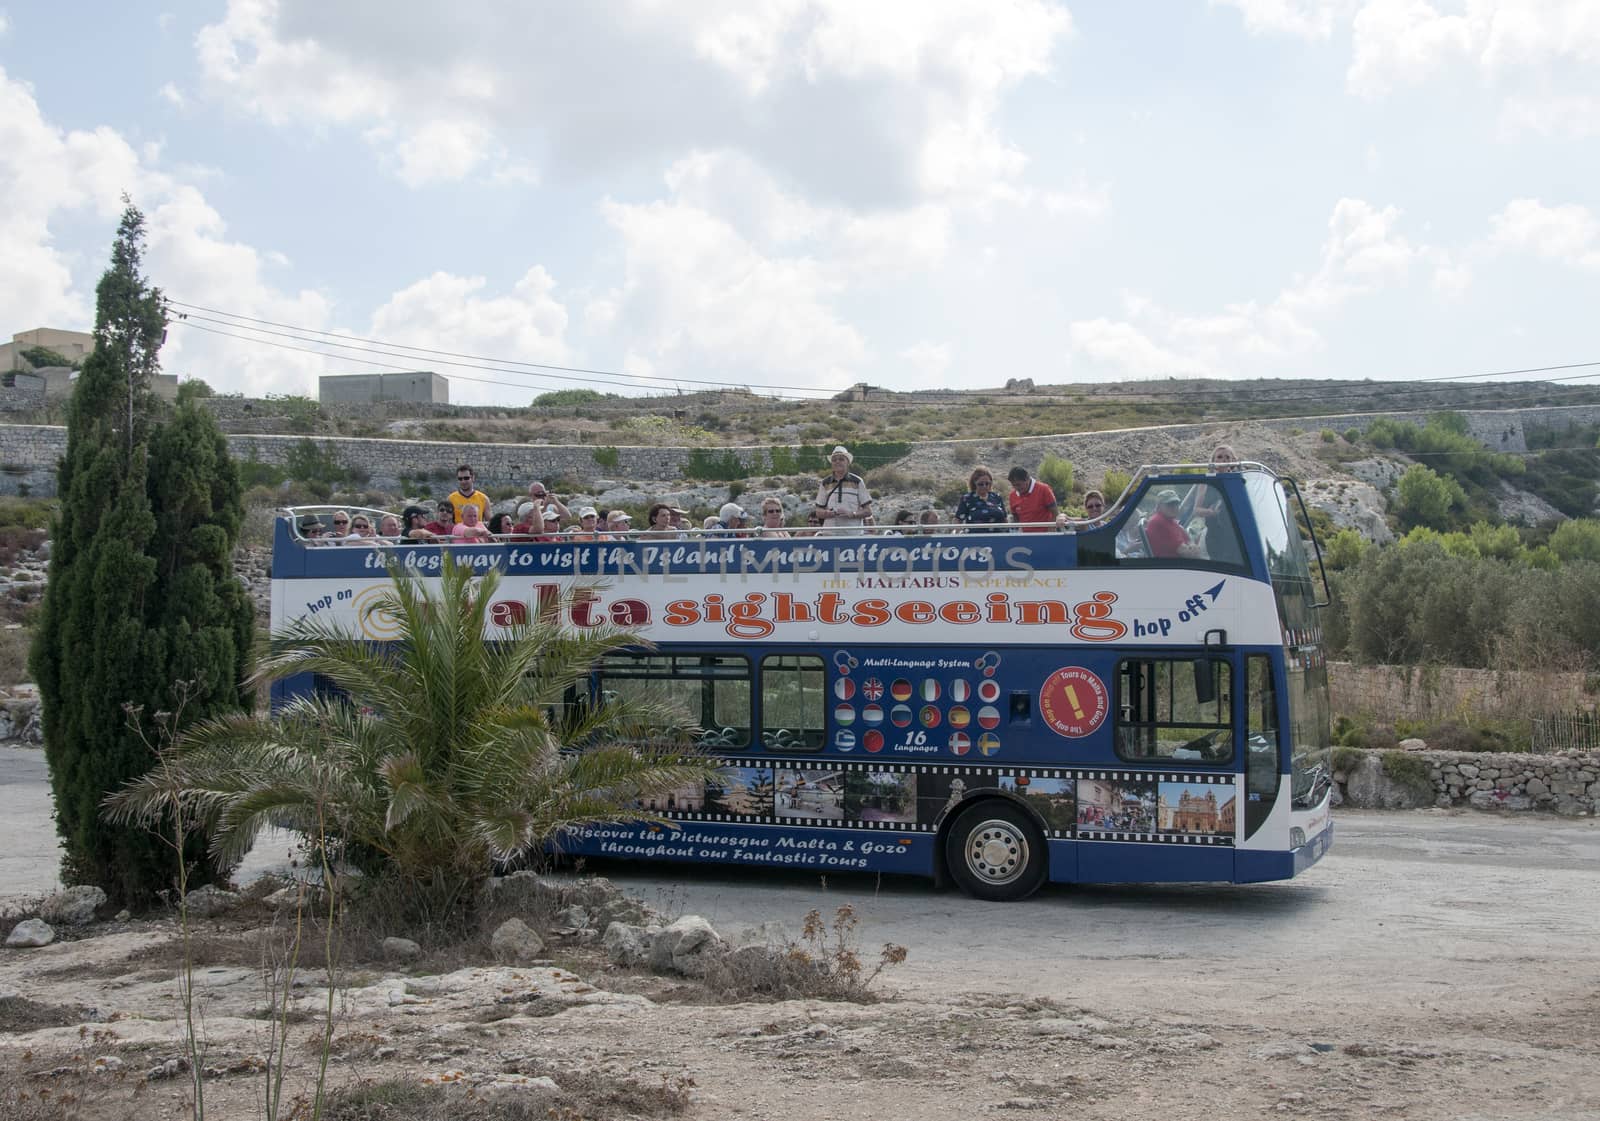 VALETTA,MALTA-AUGUST 29, 2011: People enjoy vacation on the island Malta in the bus, on August 29 2011, the bus is sightseeing bus that tours around the island for tourists